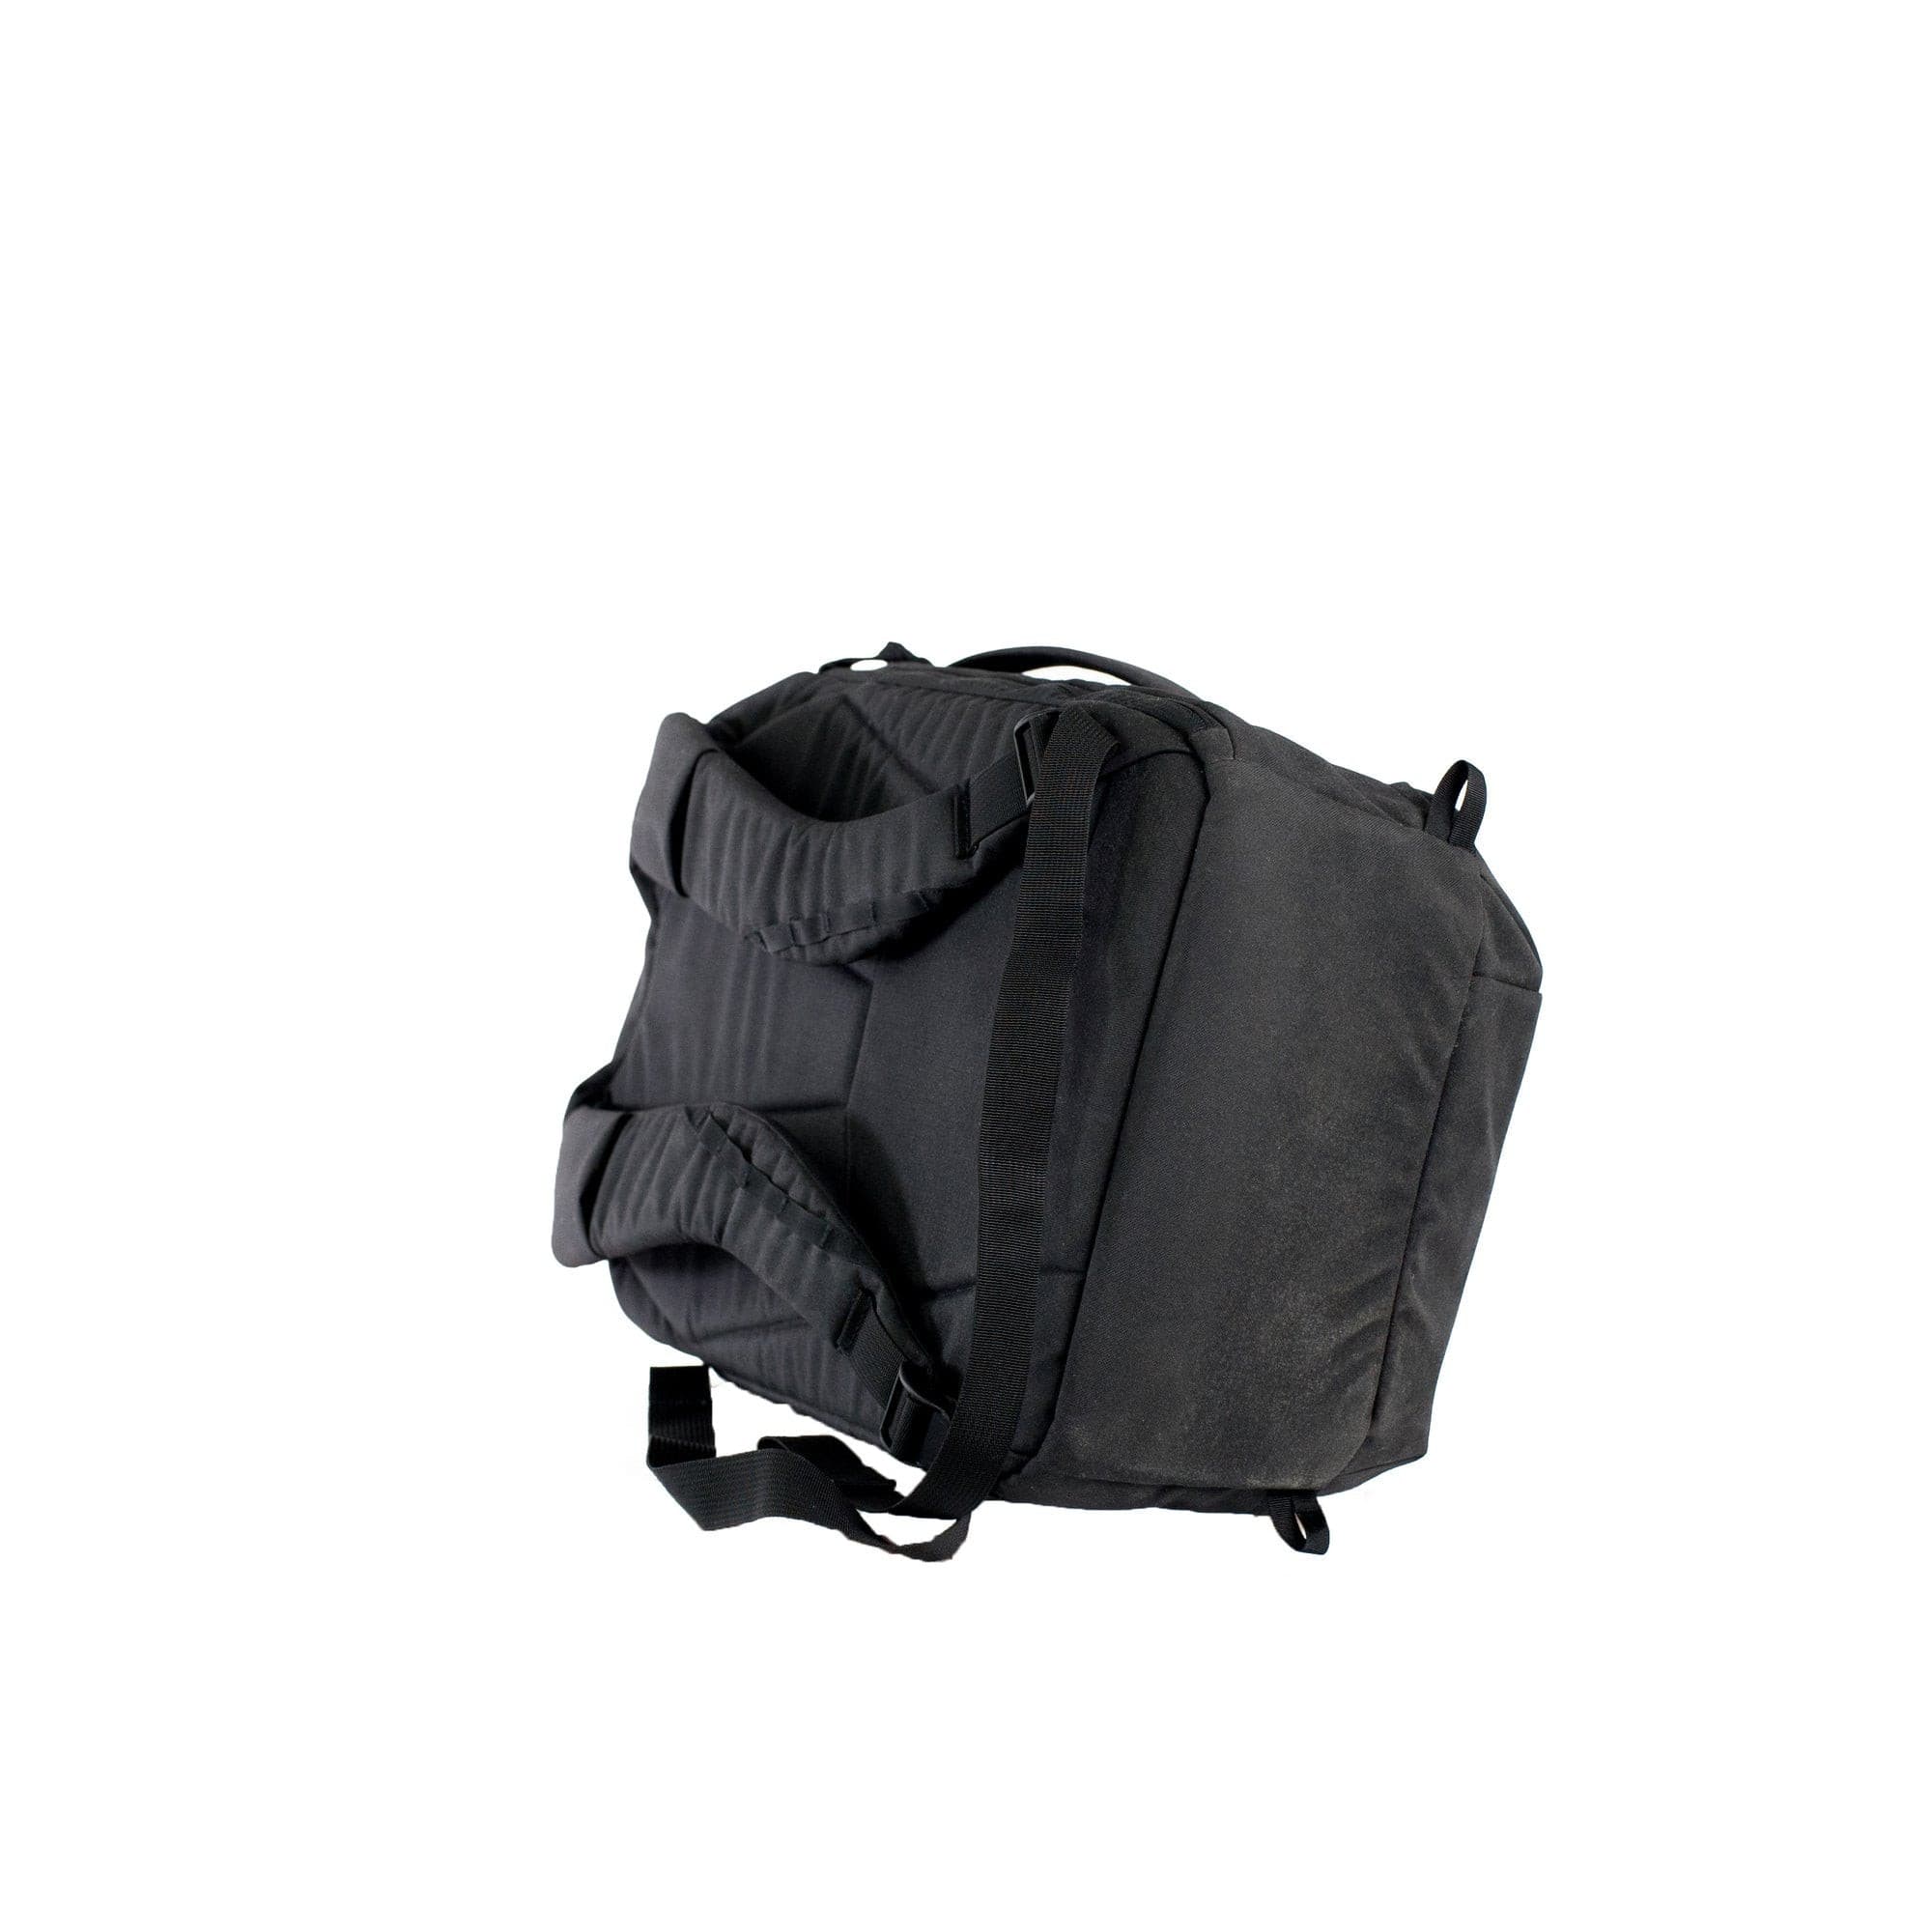 Civic Panel Loader CPL24 Evergoods Backpack Suburban.